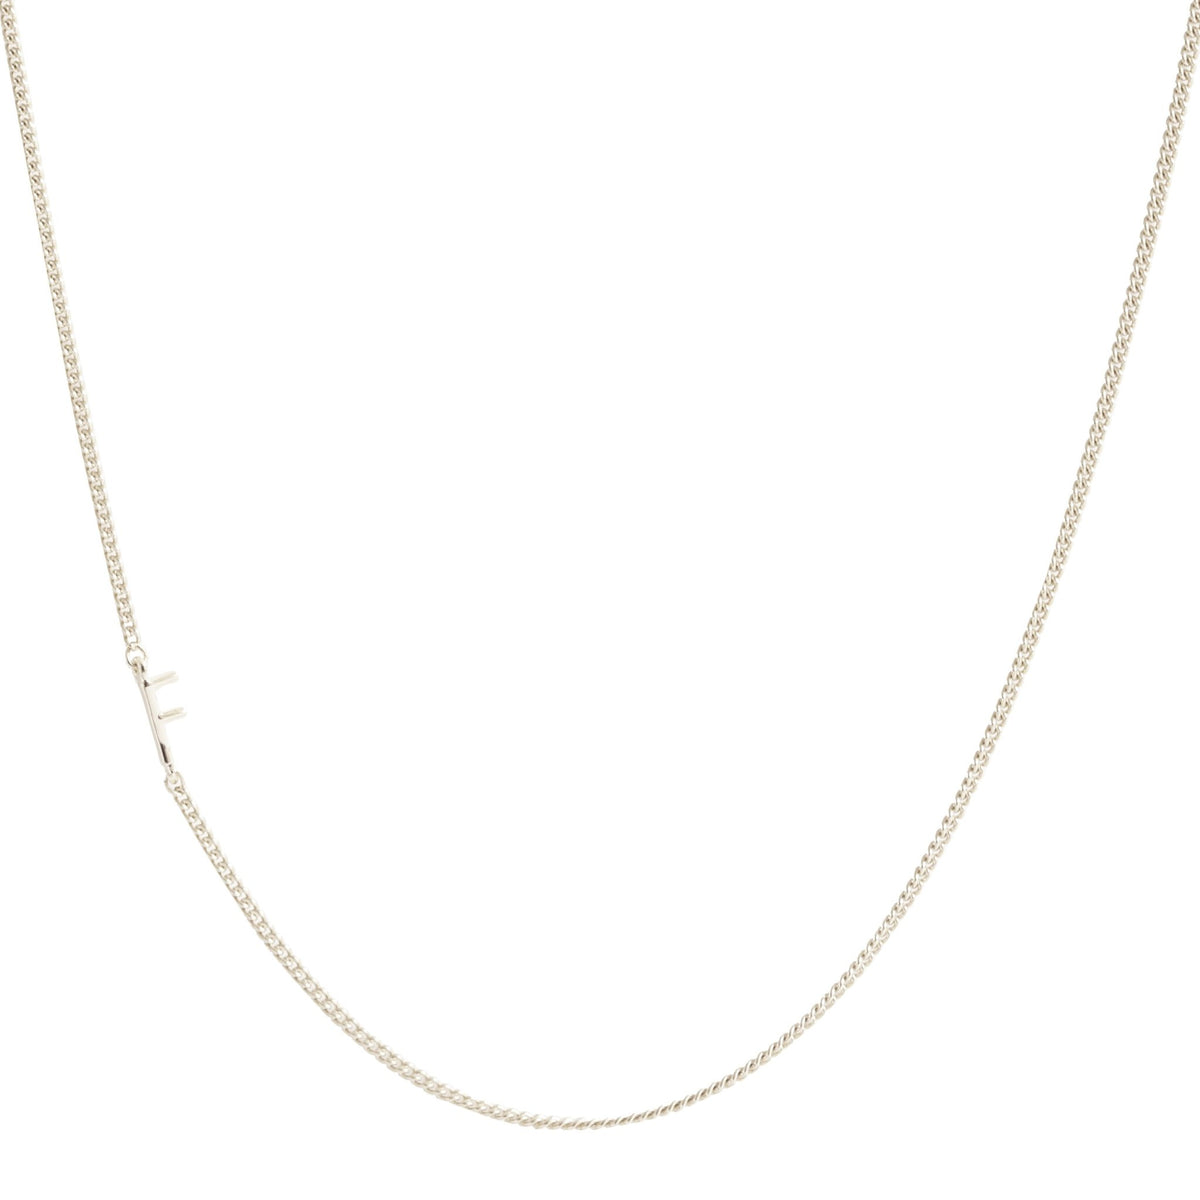 NOTABLE OFFSET INITIAL NECKLACE - F - GOLD, ROSE GOLD, OR SILVER - SO PRETTY CARA COTTER